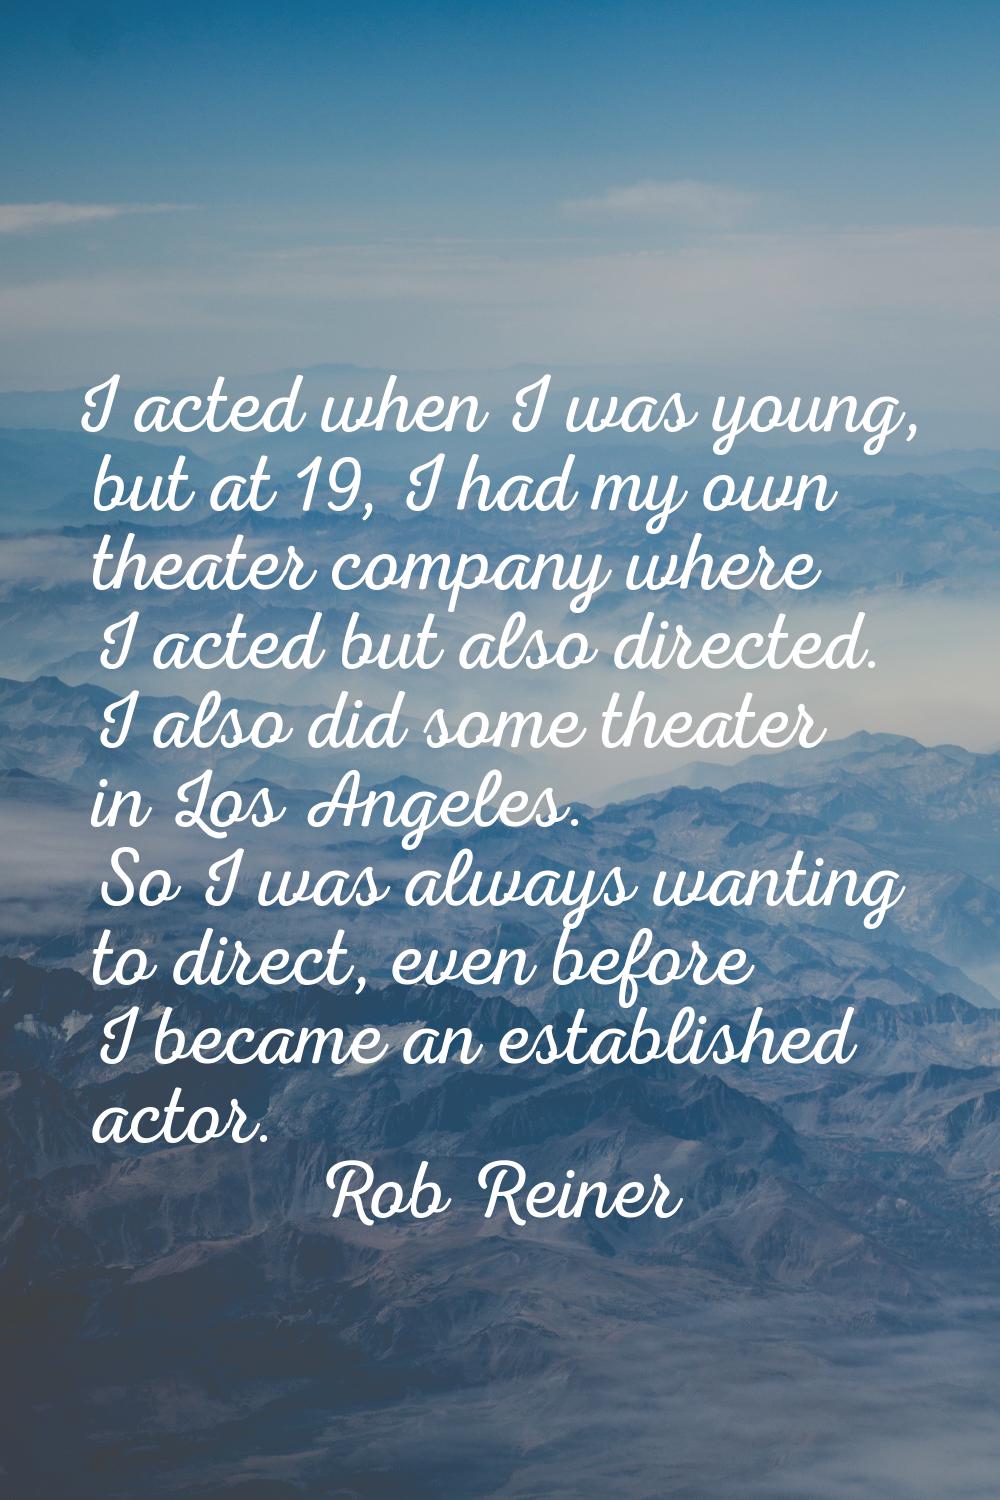 I acted when I was young, but at 19, I had my own theater company where I acted but also directed. 